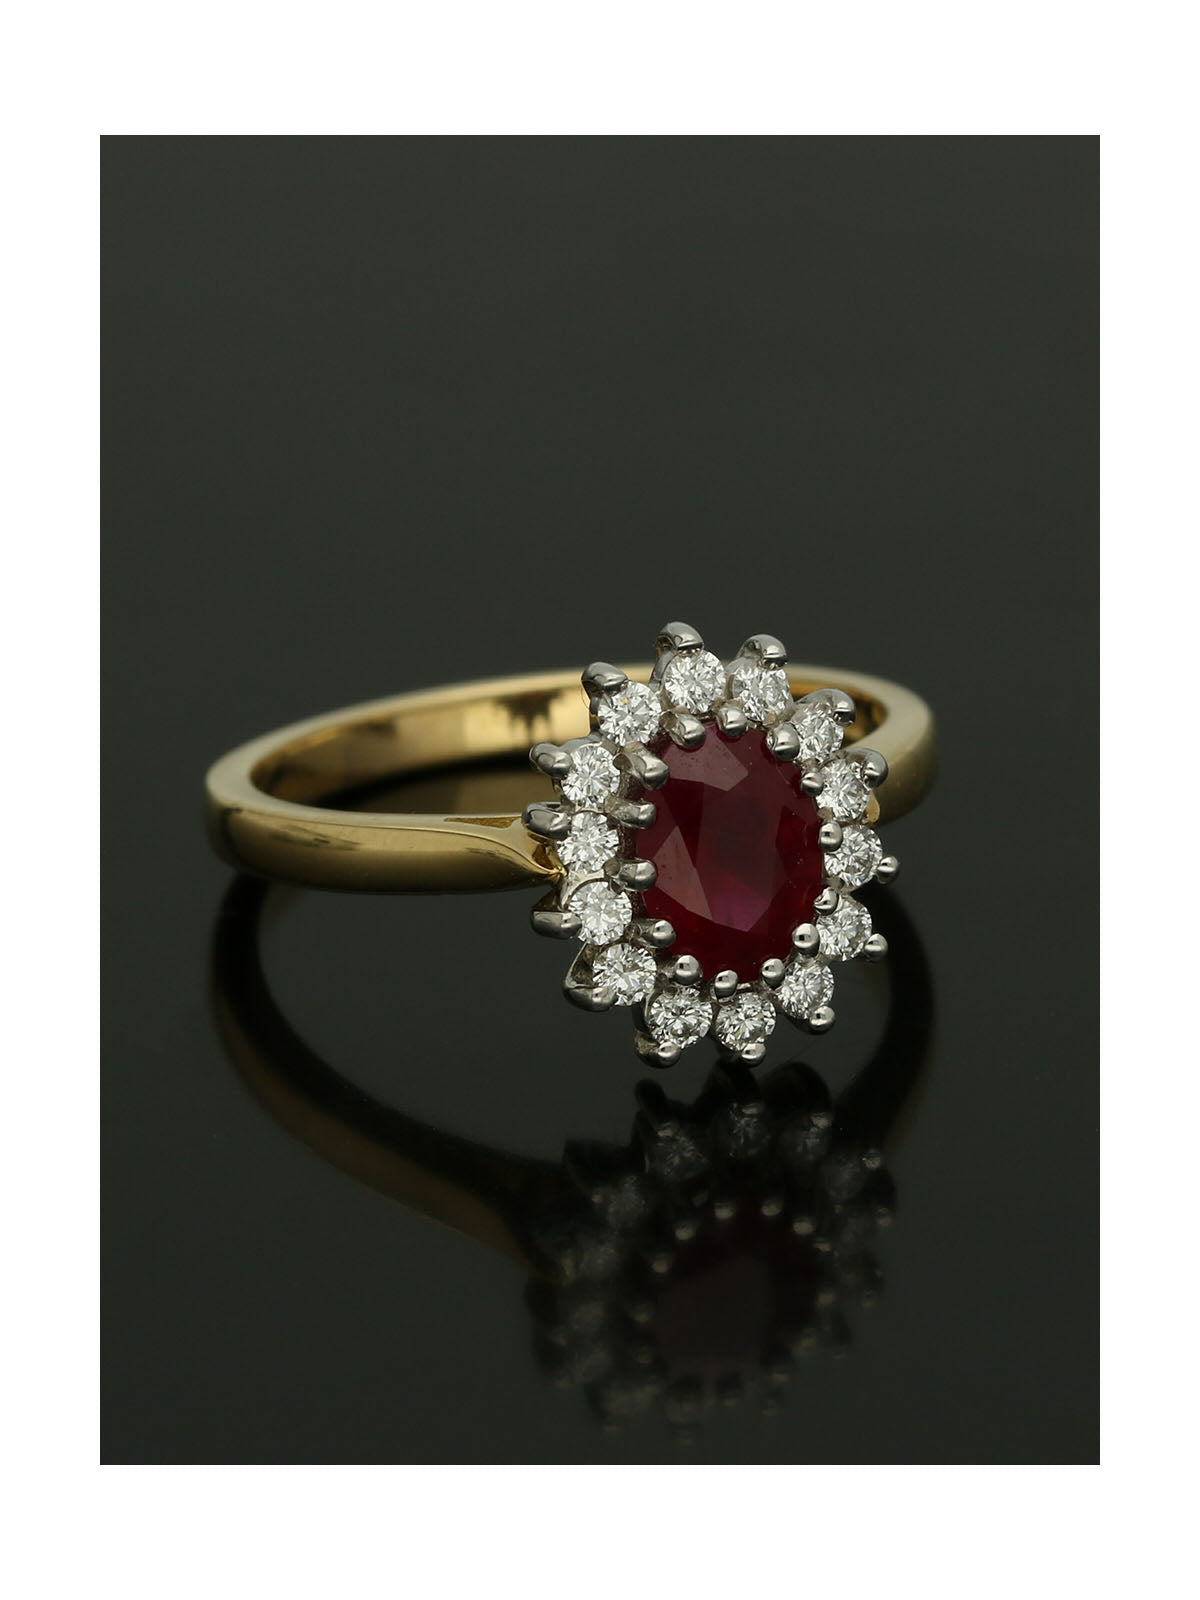 Ruby & Diamond Oval Cut Cluster Ring in 18ct Yellow & White Gold